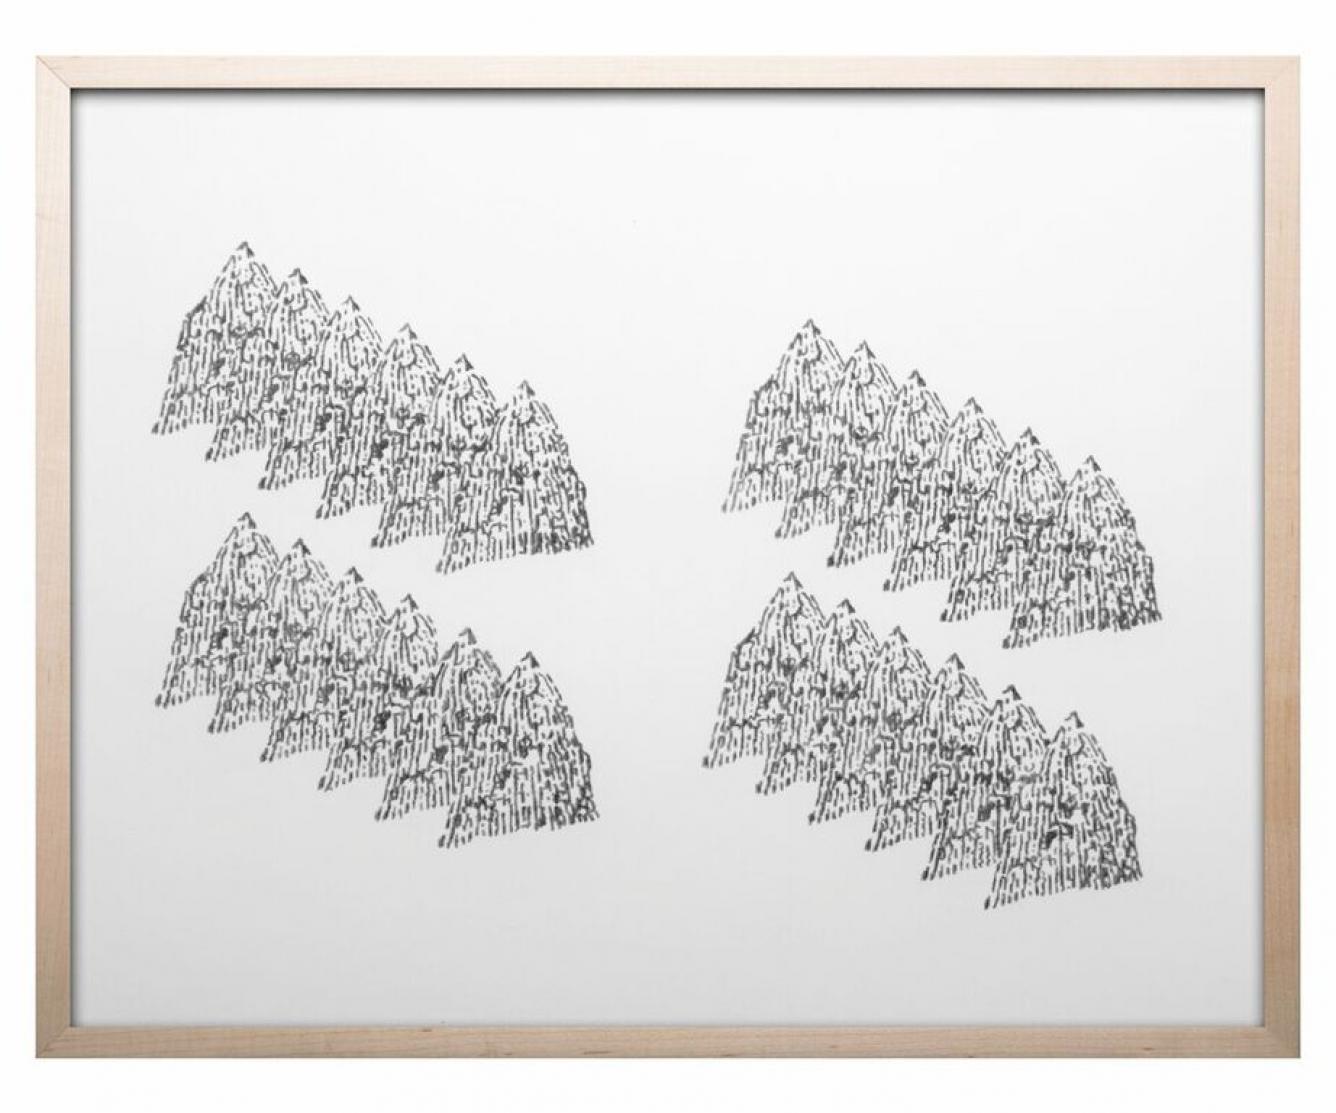 Carbon on paper artwork by Chris Oatey depicting an abstracted landscape in black, white, and gray.